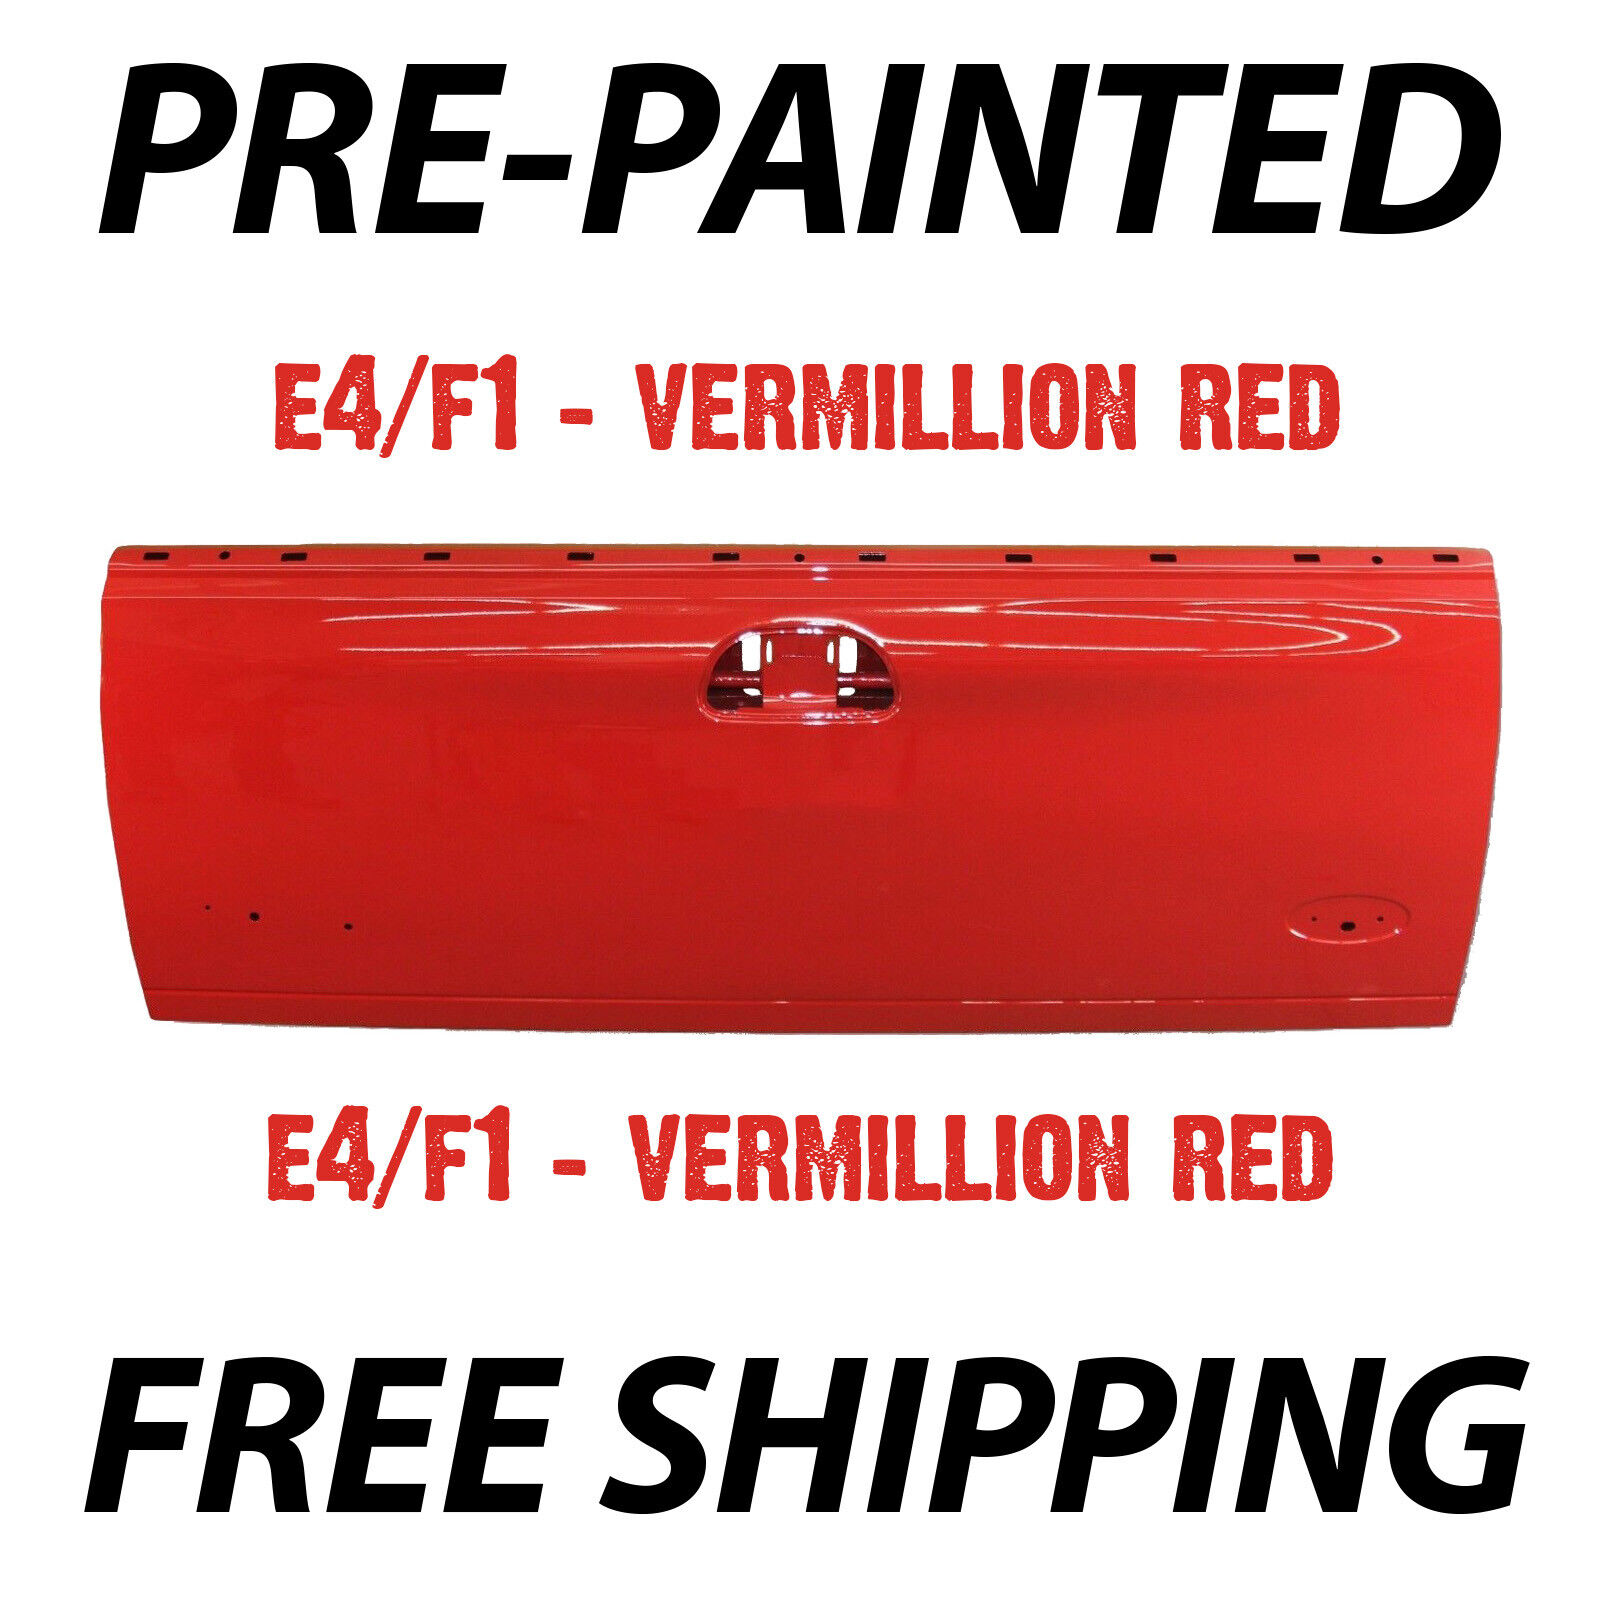 New Painted F1/E4 Vermilion Red - Rear Tailgate for Ford F250 F350 Super Duty